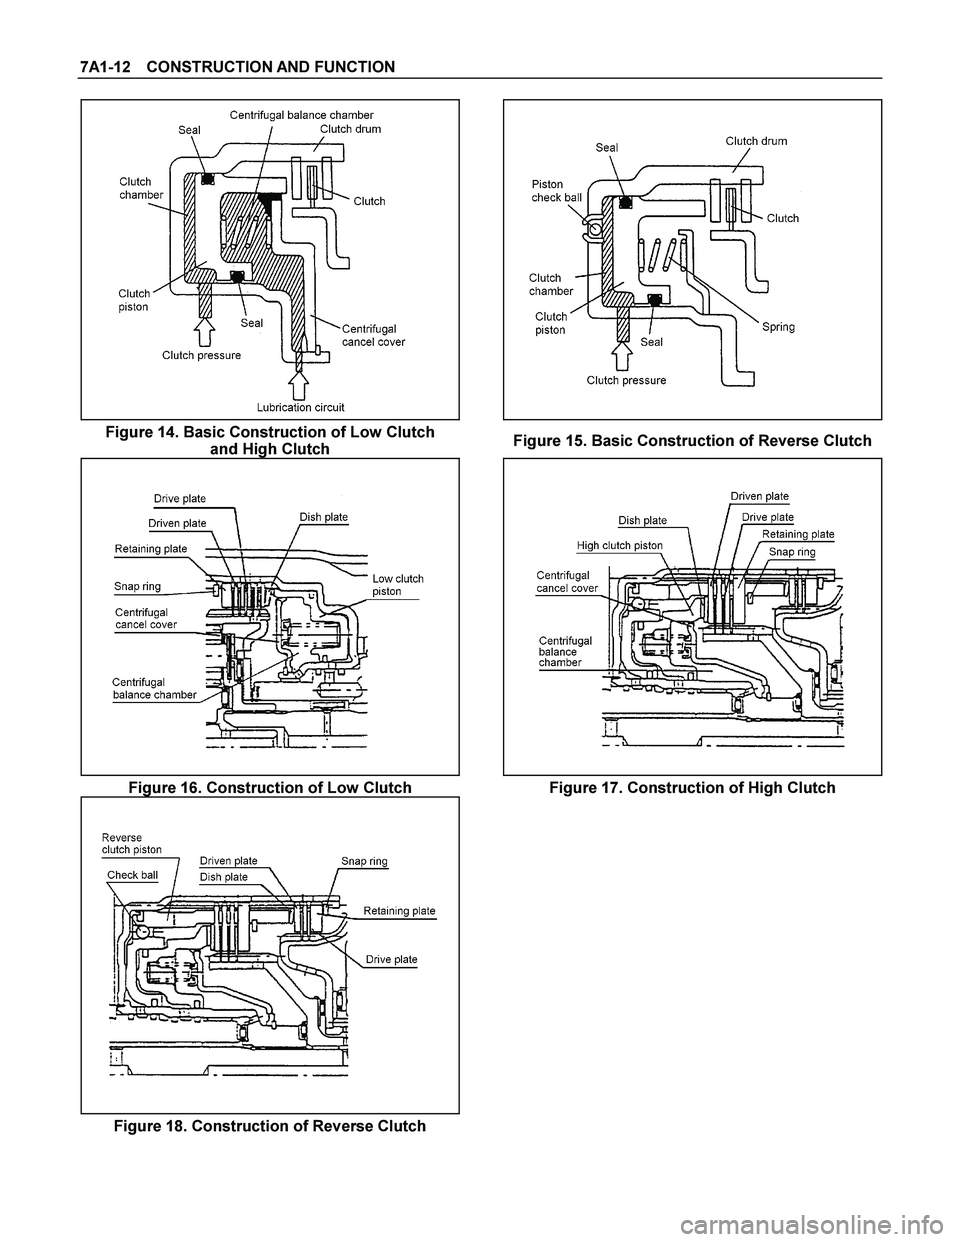 ISUZU TF SERIES 2004  Workshop Manual 7A1-12  CONSTRUCTION AND FUNCTION 
 
 
 
Figure 14. Basic Construction of Low Clutch 
and High Clutch  Figure 15. Basic Construction of Reverse Clutch
   
Figure 16. Construction of Low Clutch  Figure